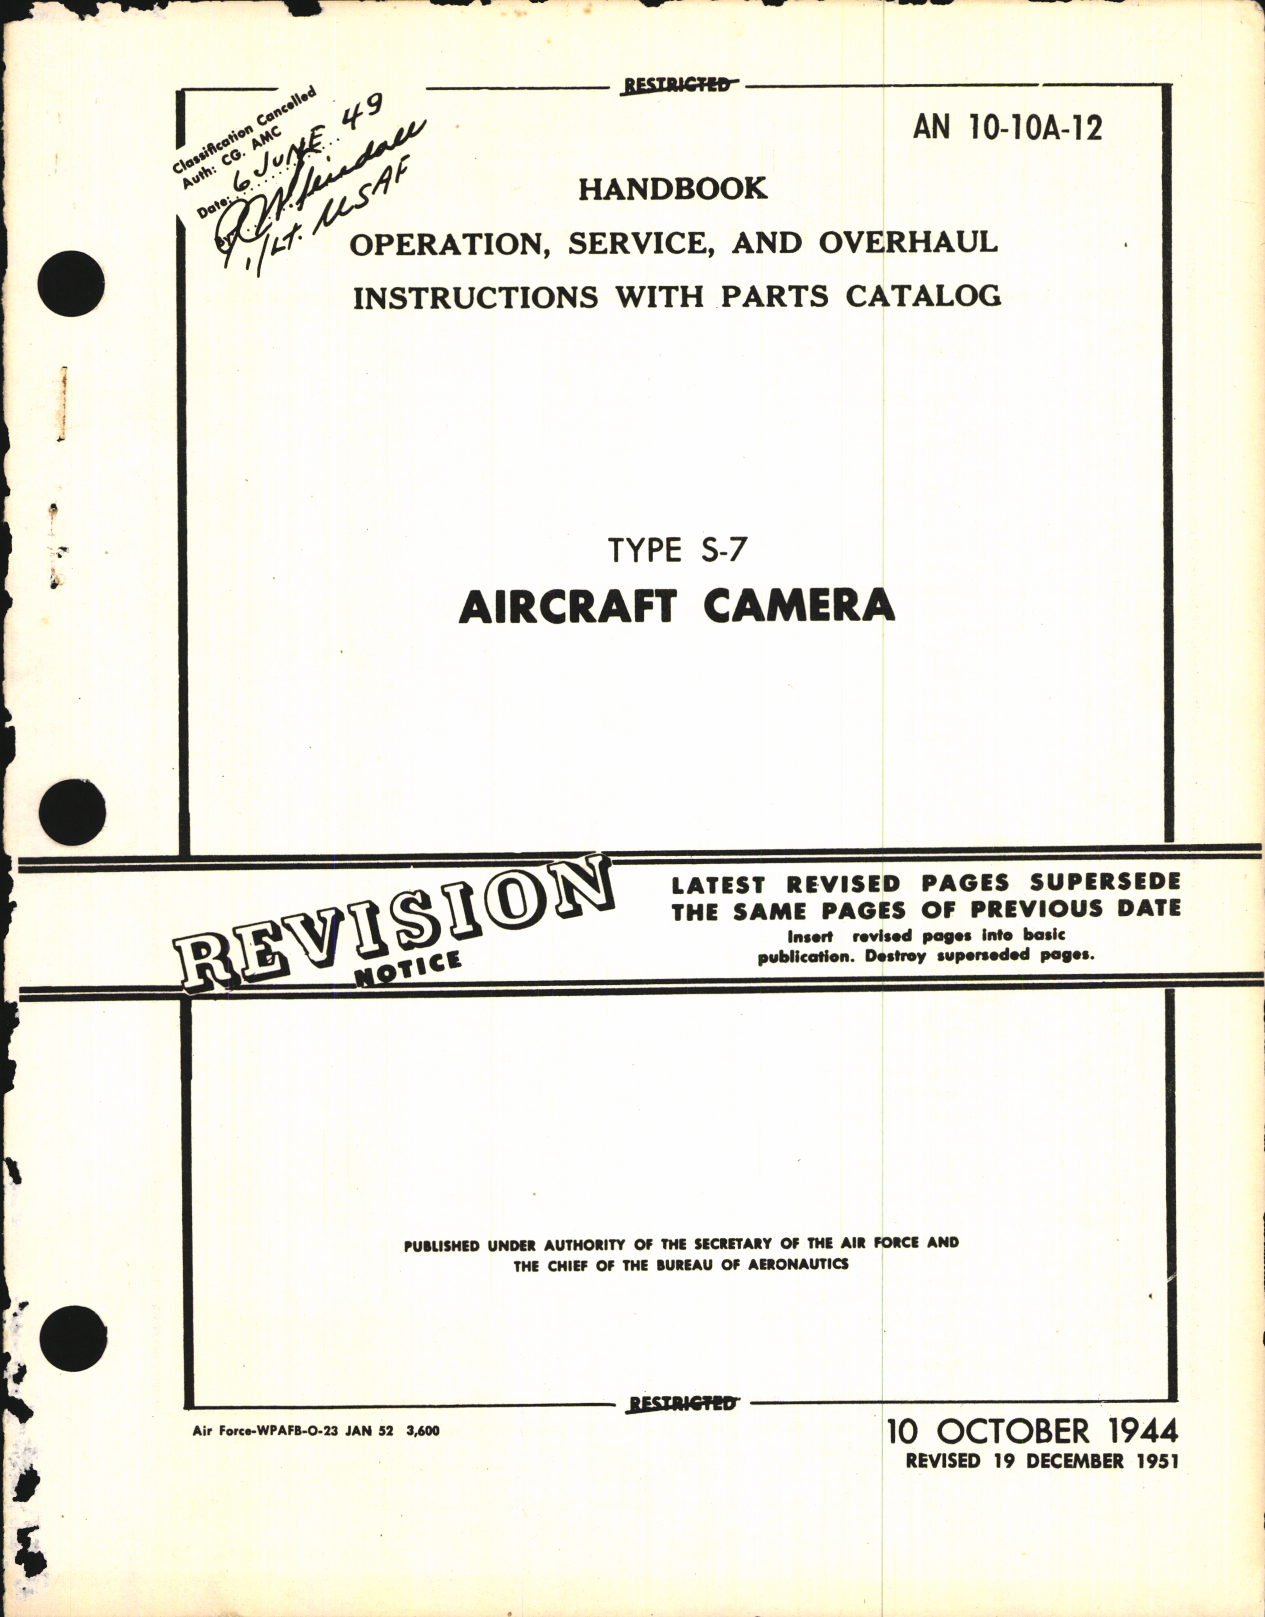 Sample page 1 from AirCorps Library document: Operation, Service, & Overhaul Instructions with Parts Catalog for Type S-7 Aircraft Camera